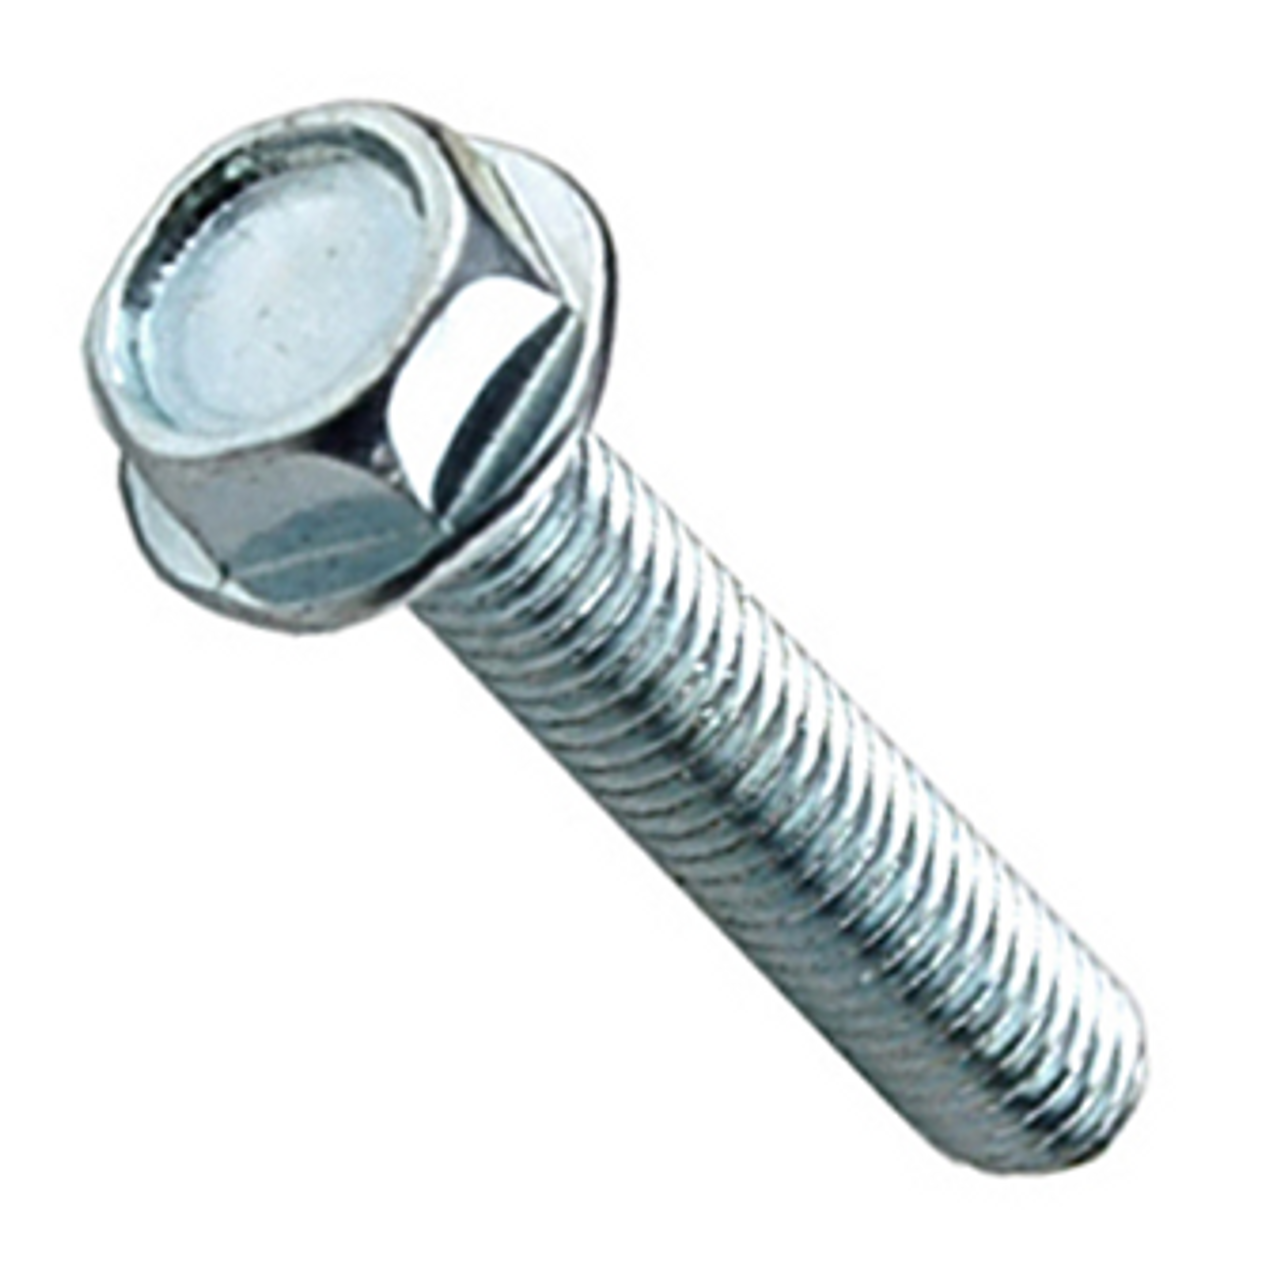 8-32 X 1" Indented Hex Head Zinc plated Machine Screws Full Thread Qty.80 Details about    